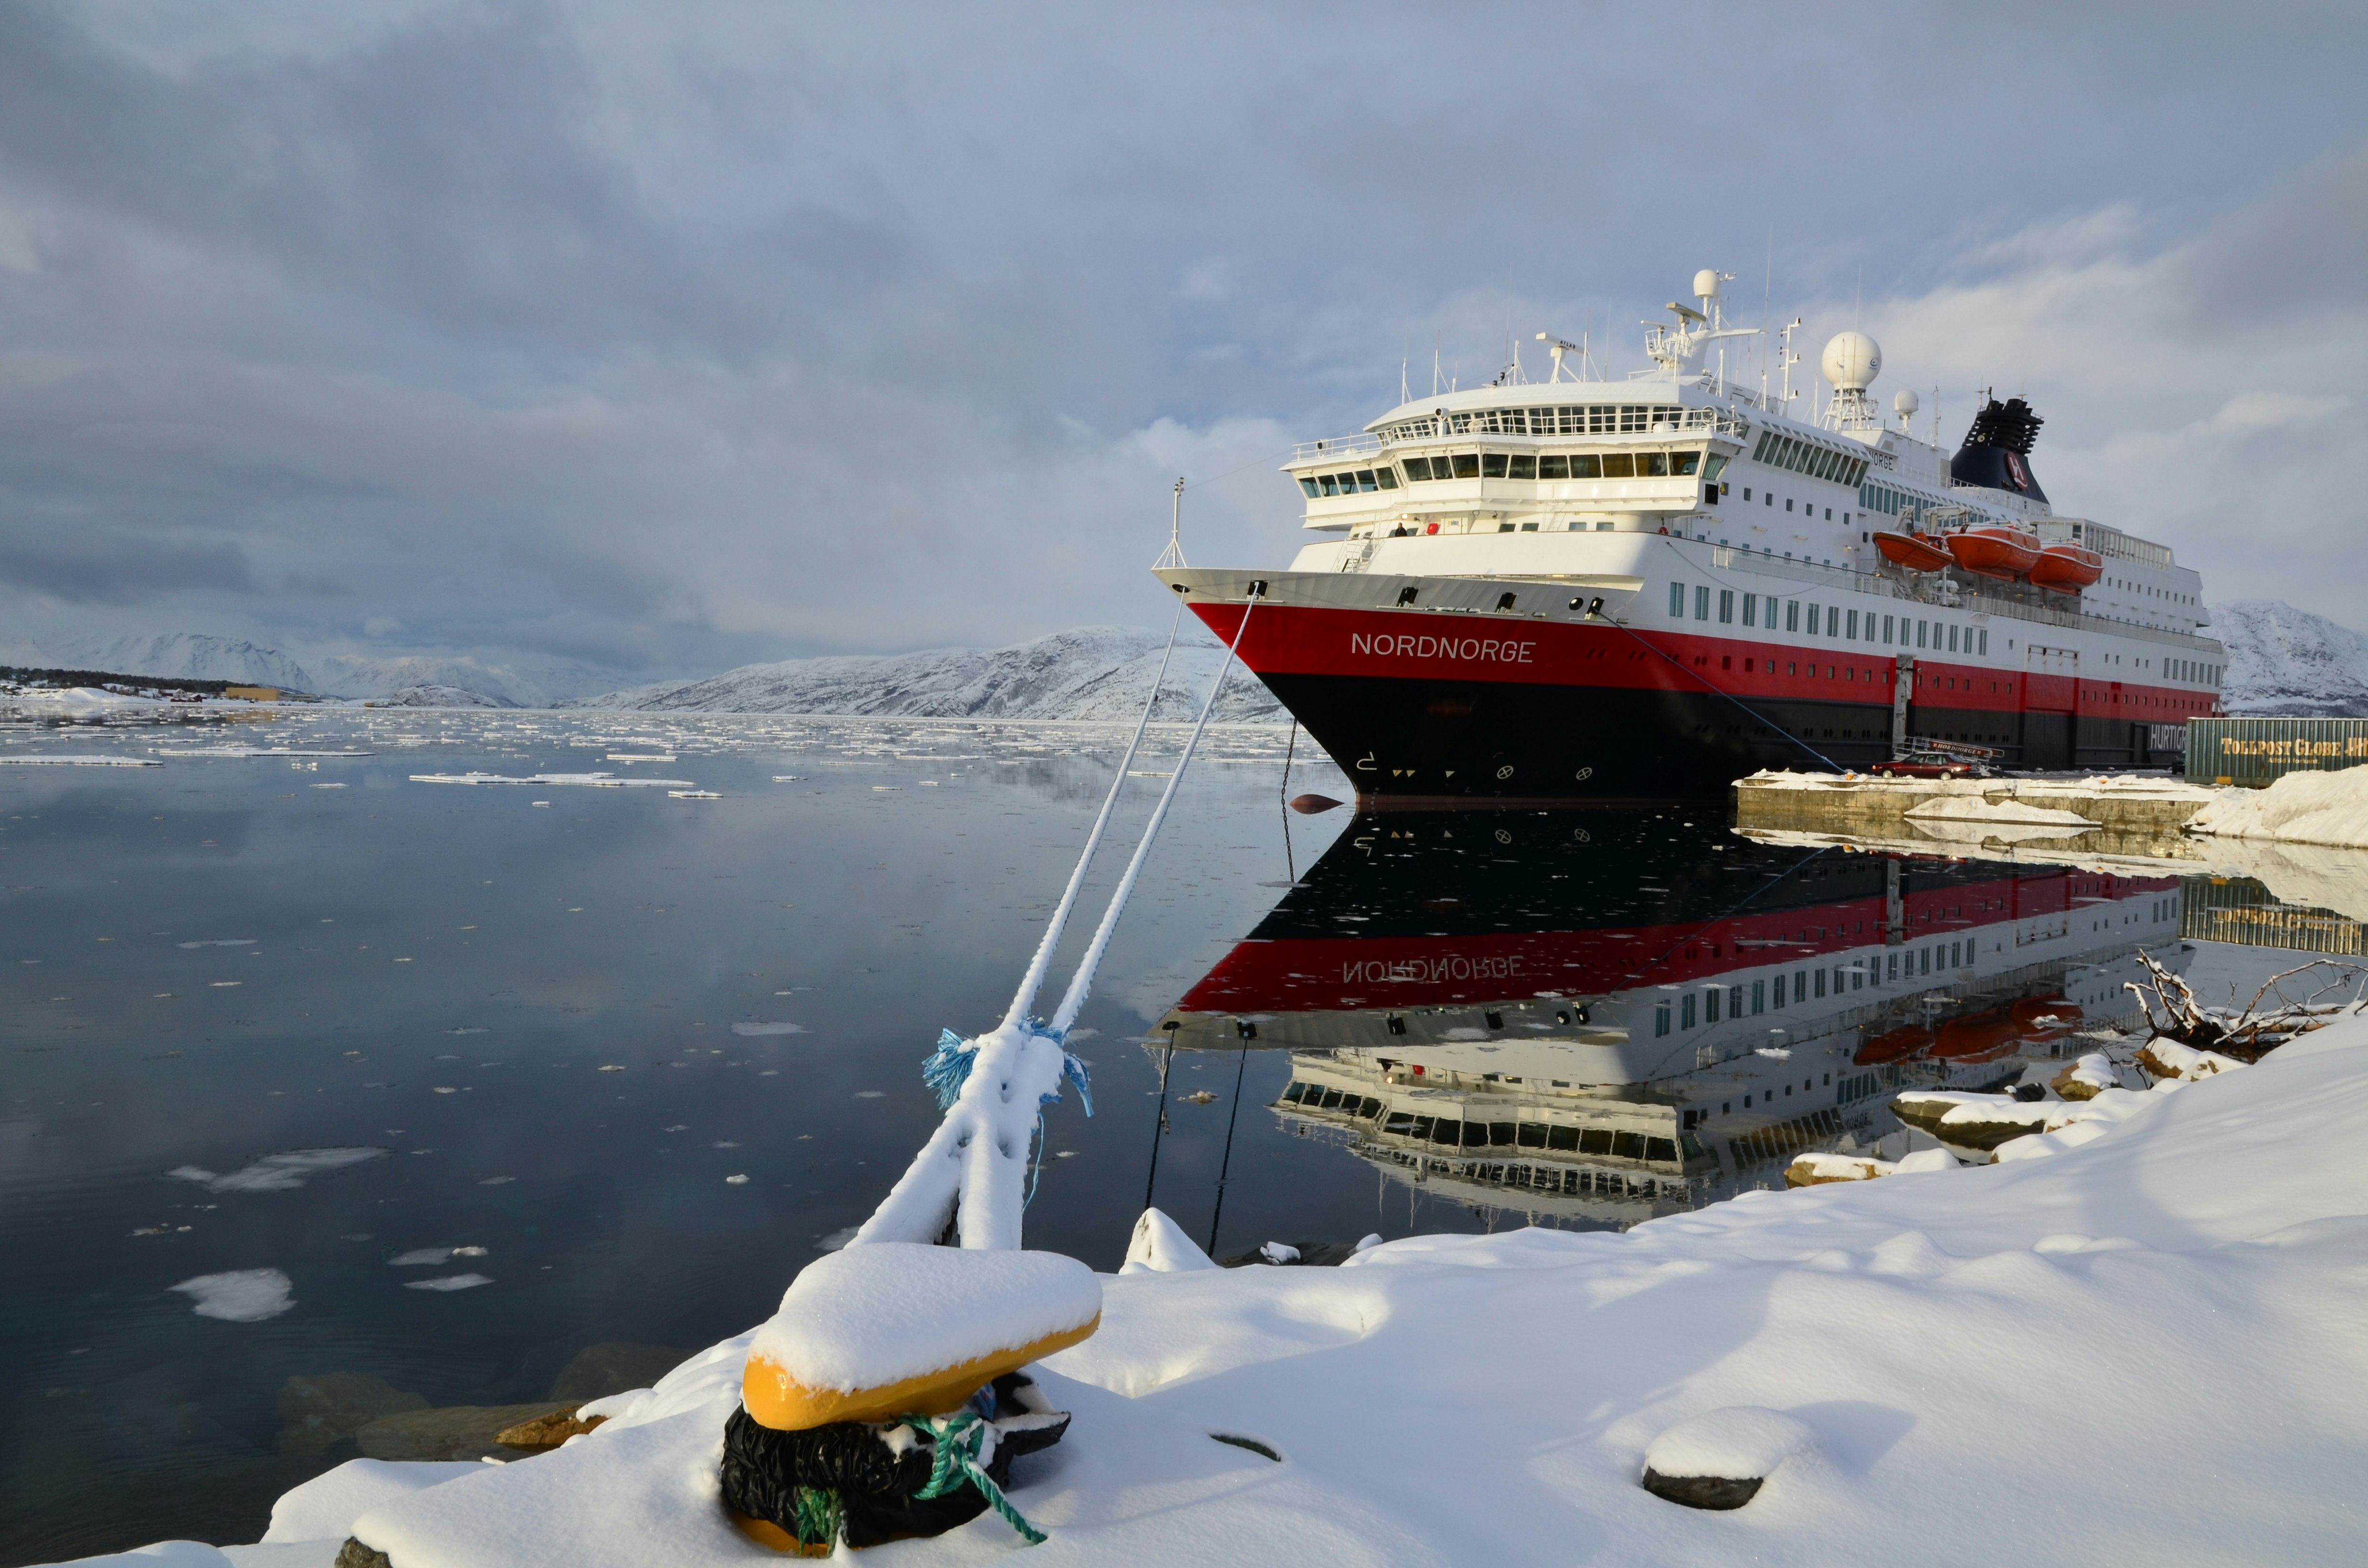 A large passenger ferry named the Nordnorge is docked at a port in winter. It's a snowy scene, and patches of ice can be seen in the water.